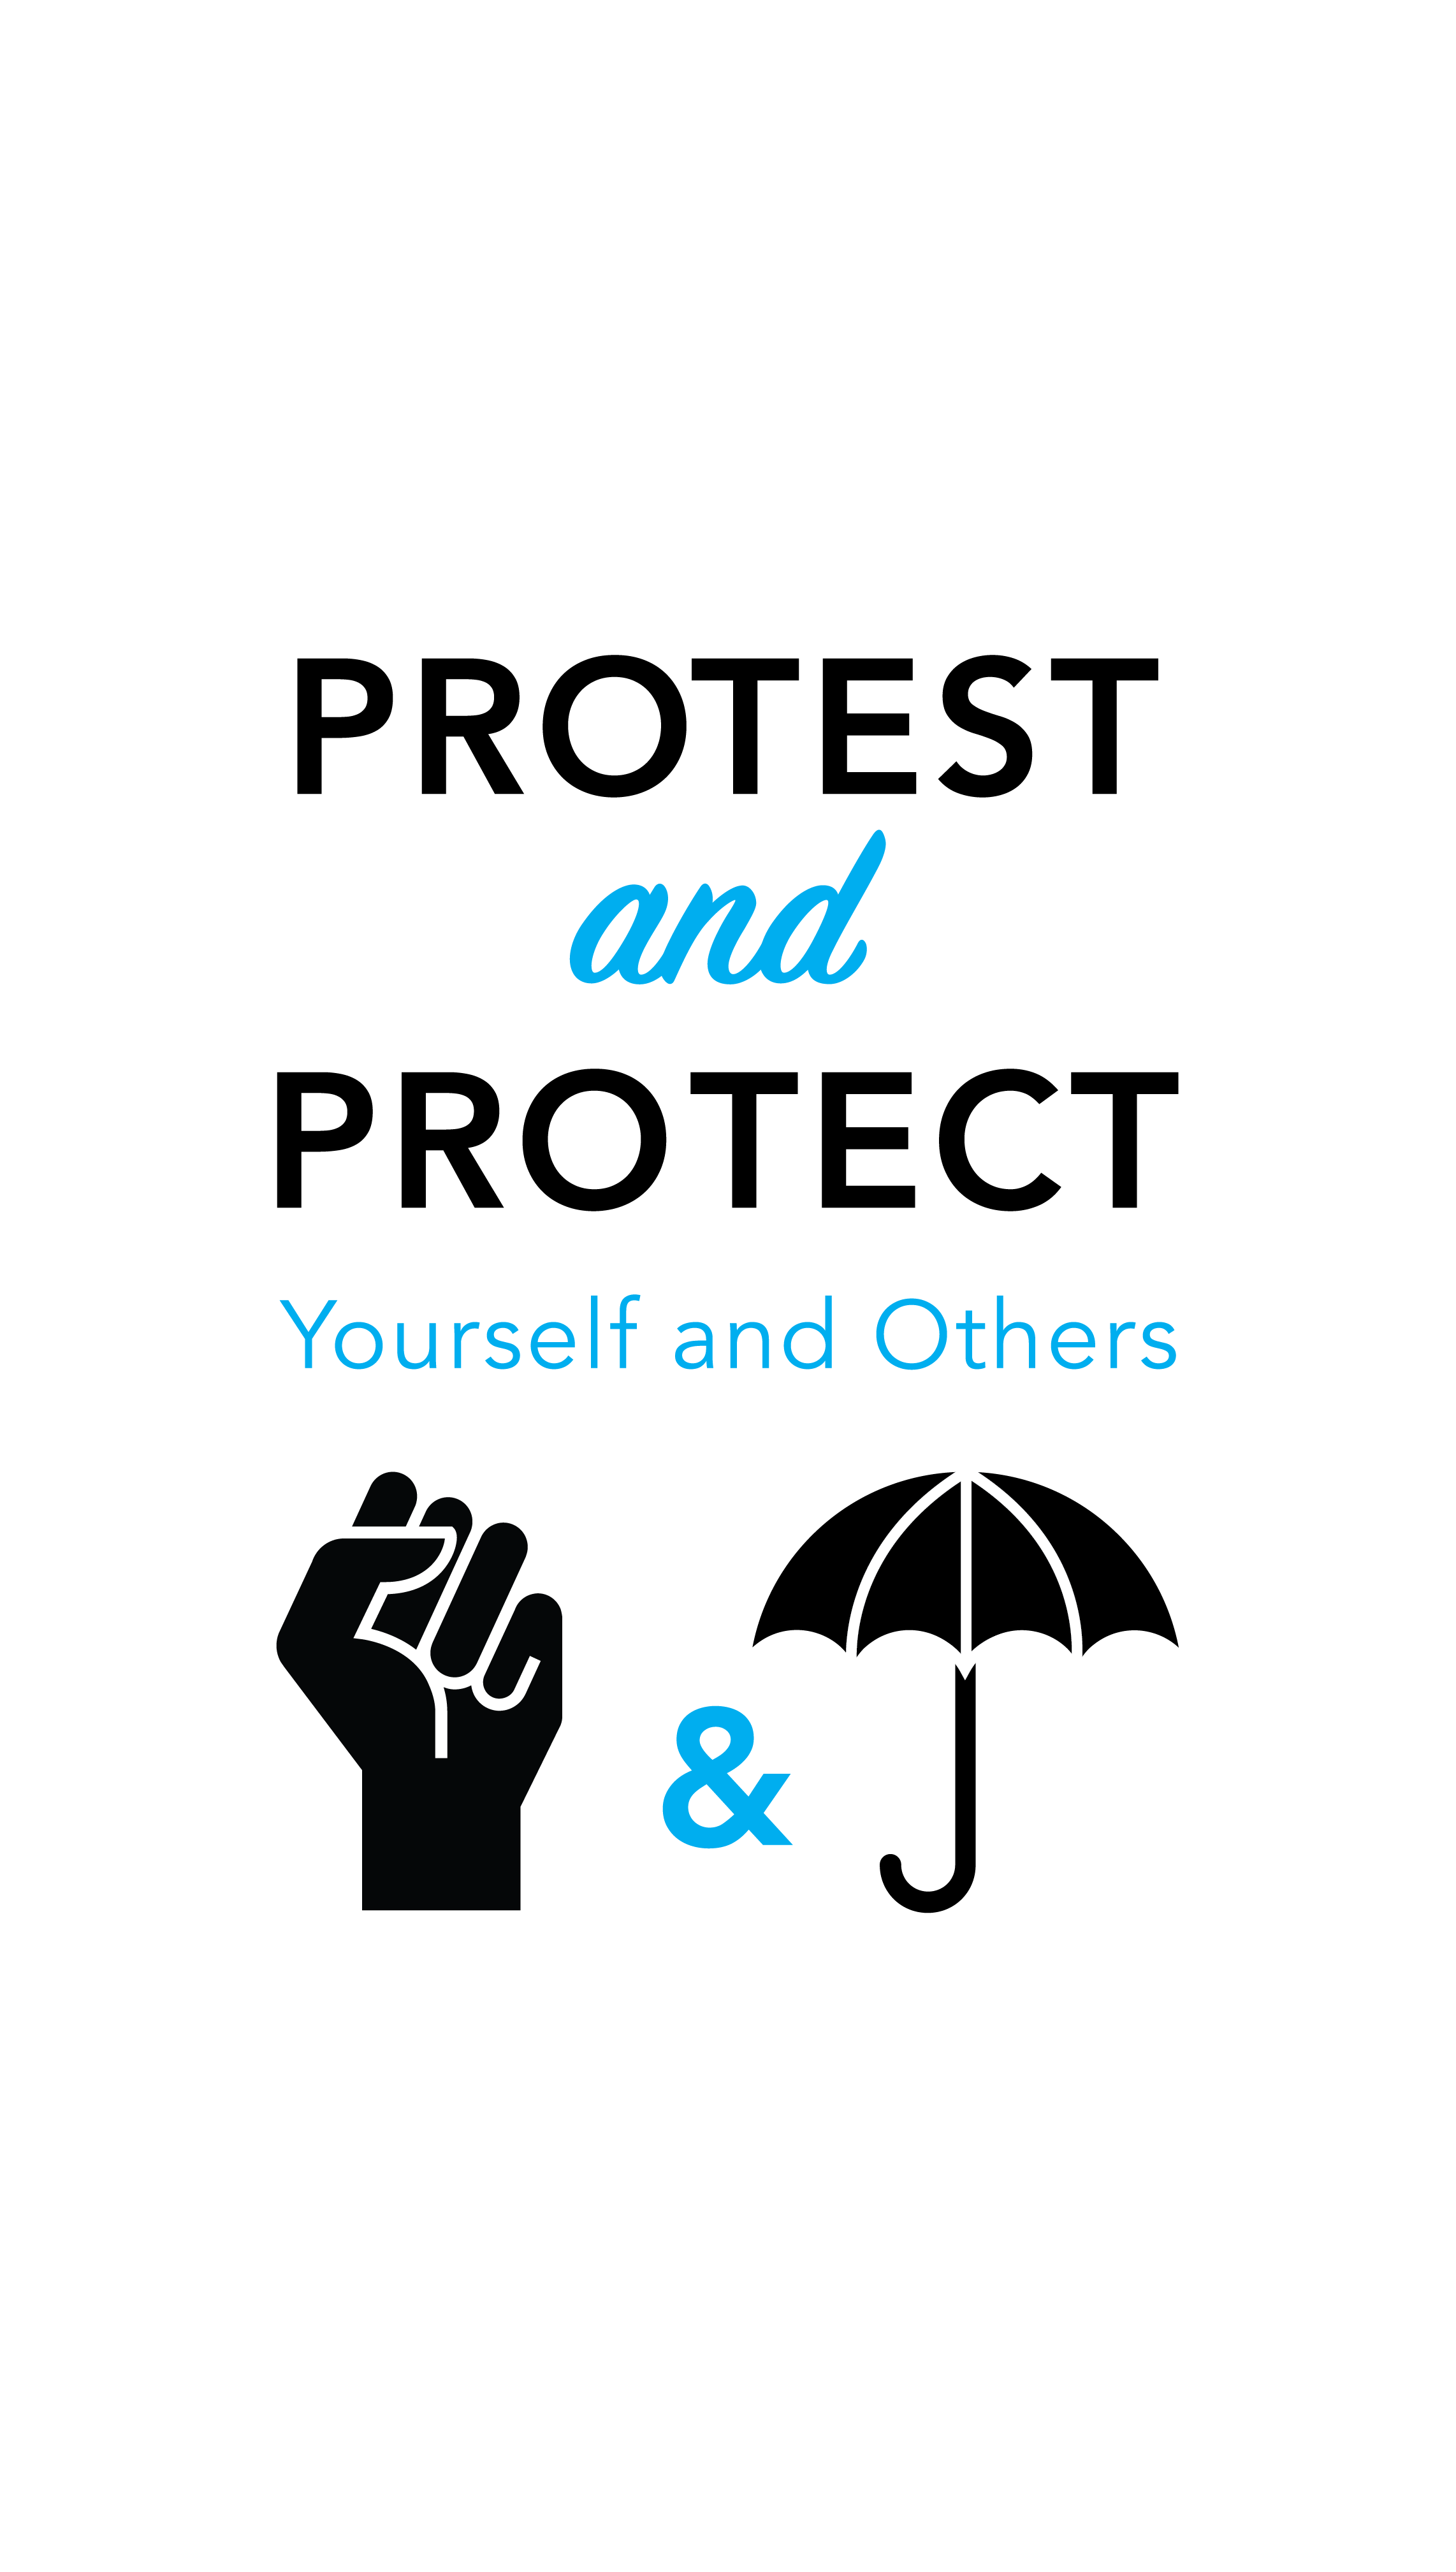 Protest and Protect Yourself and Others